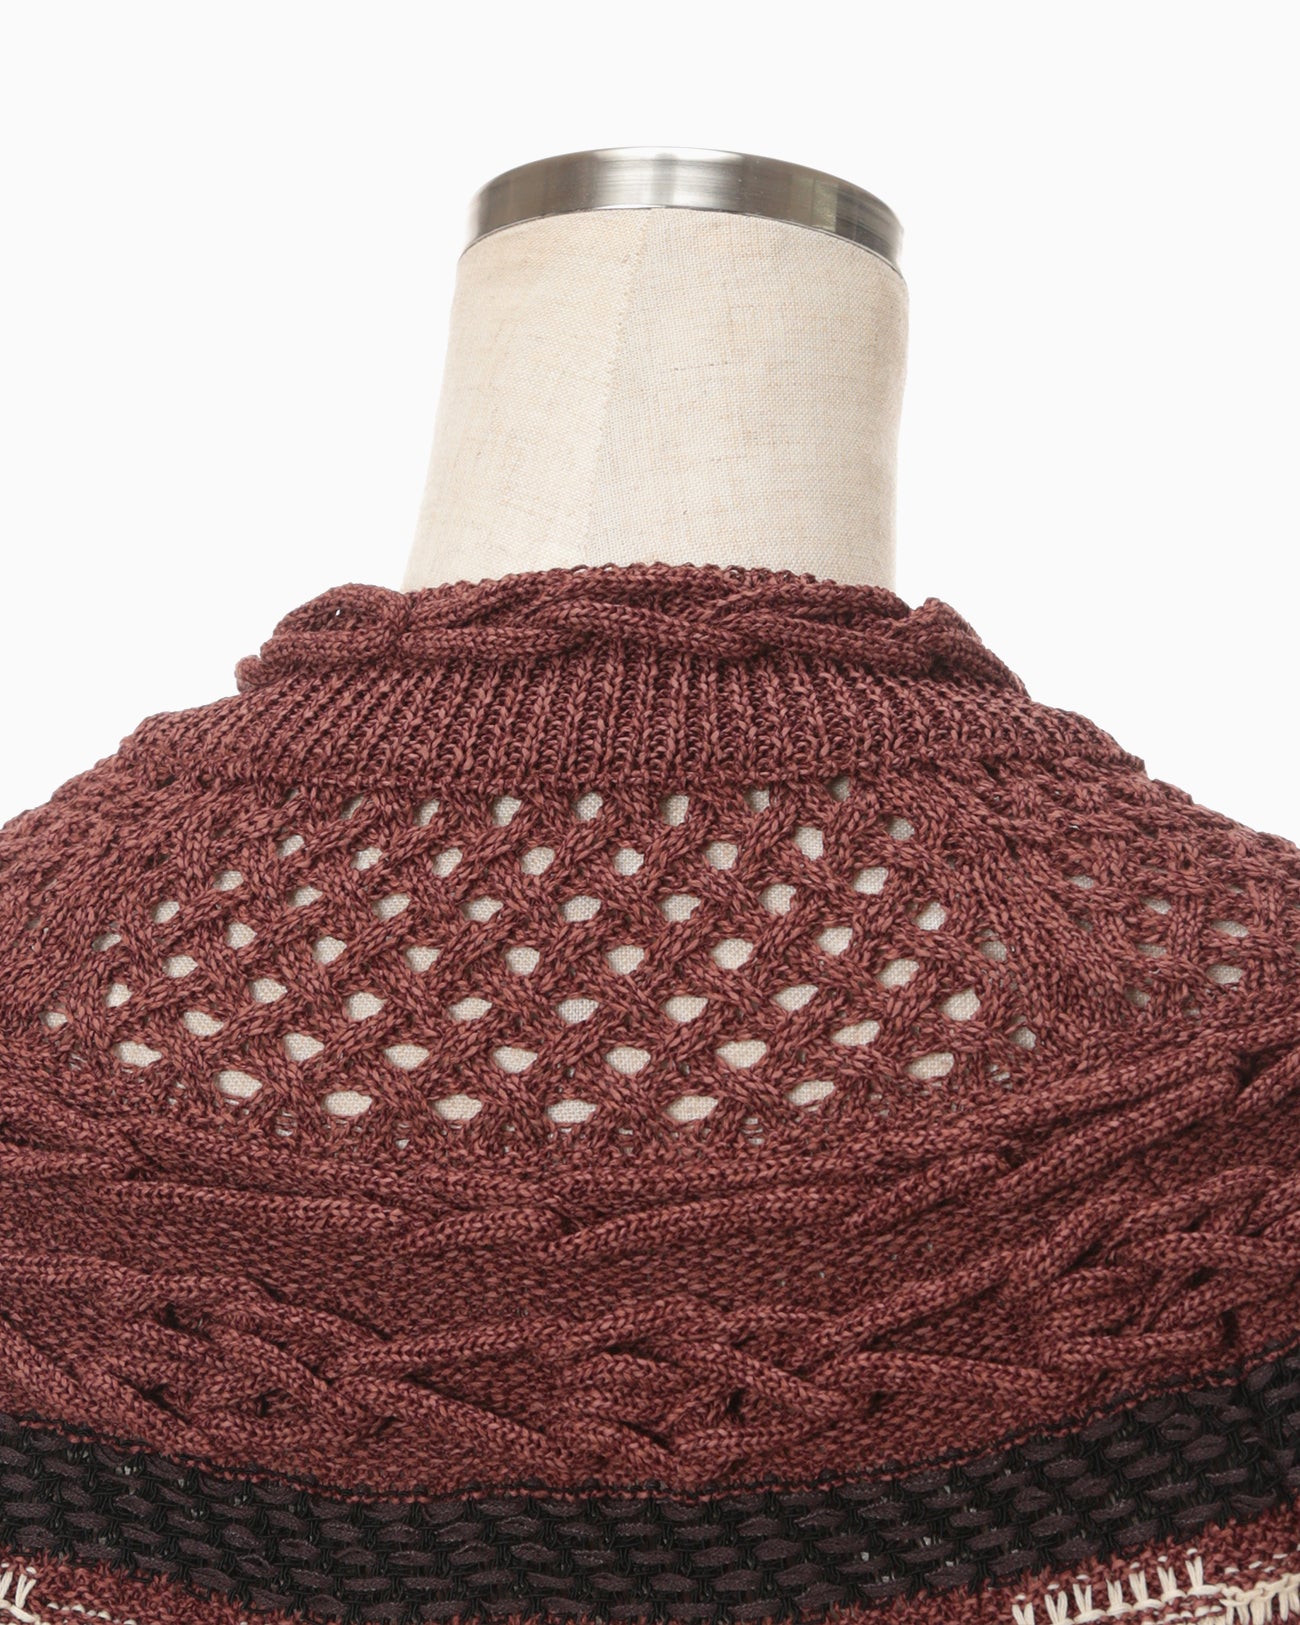 Bamboo Basket Pattern Knitted Top - brown